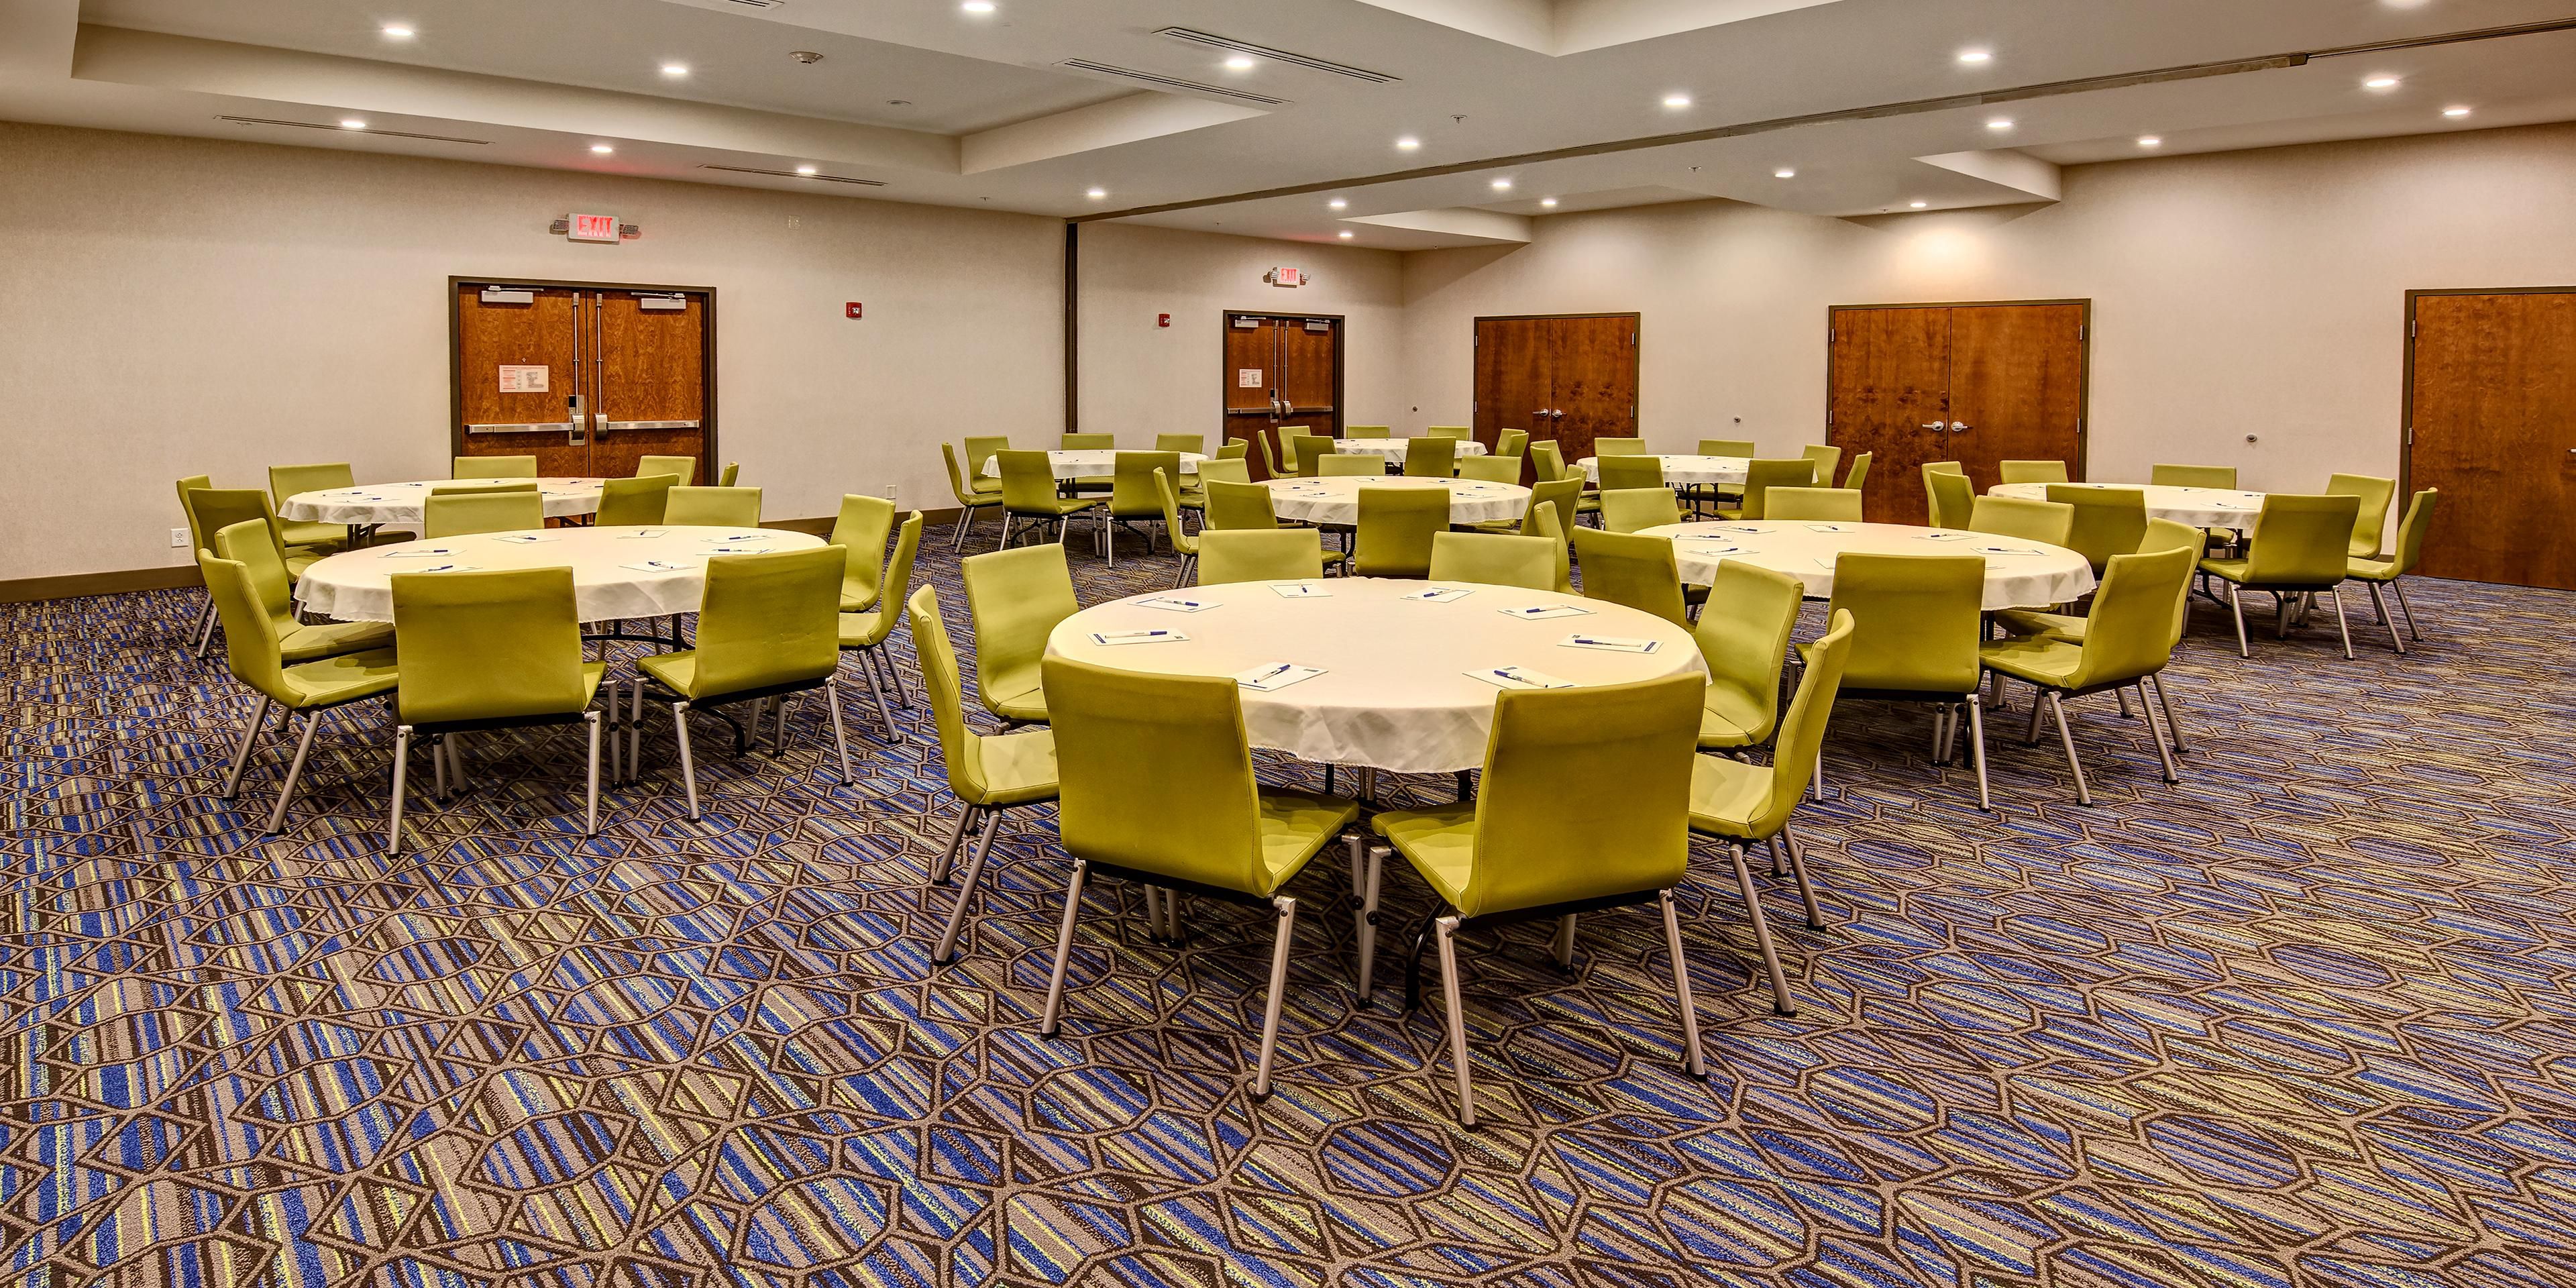 Book your next meeting or event with us and enjoy our beautifully decorated and flexible function spaces! Enjoy a convenient location near the Louisville Airport &  Expo Center to accommodate guests near and far. Simplify your next function and let us take care of the details for you! Visit our Groups & Meetings page for more details.